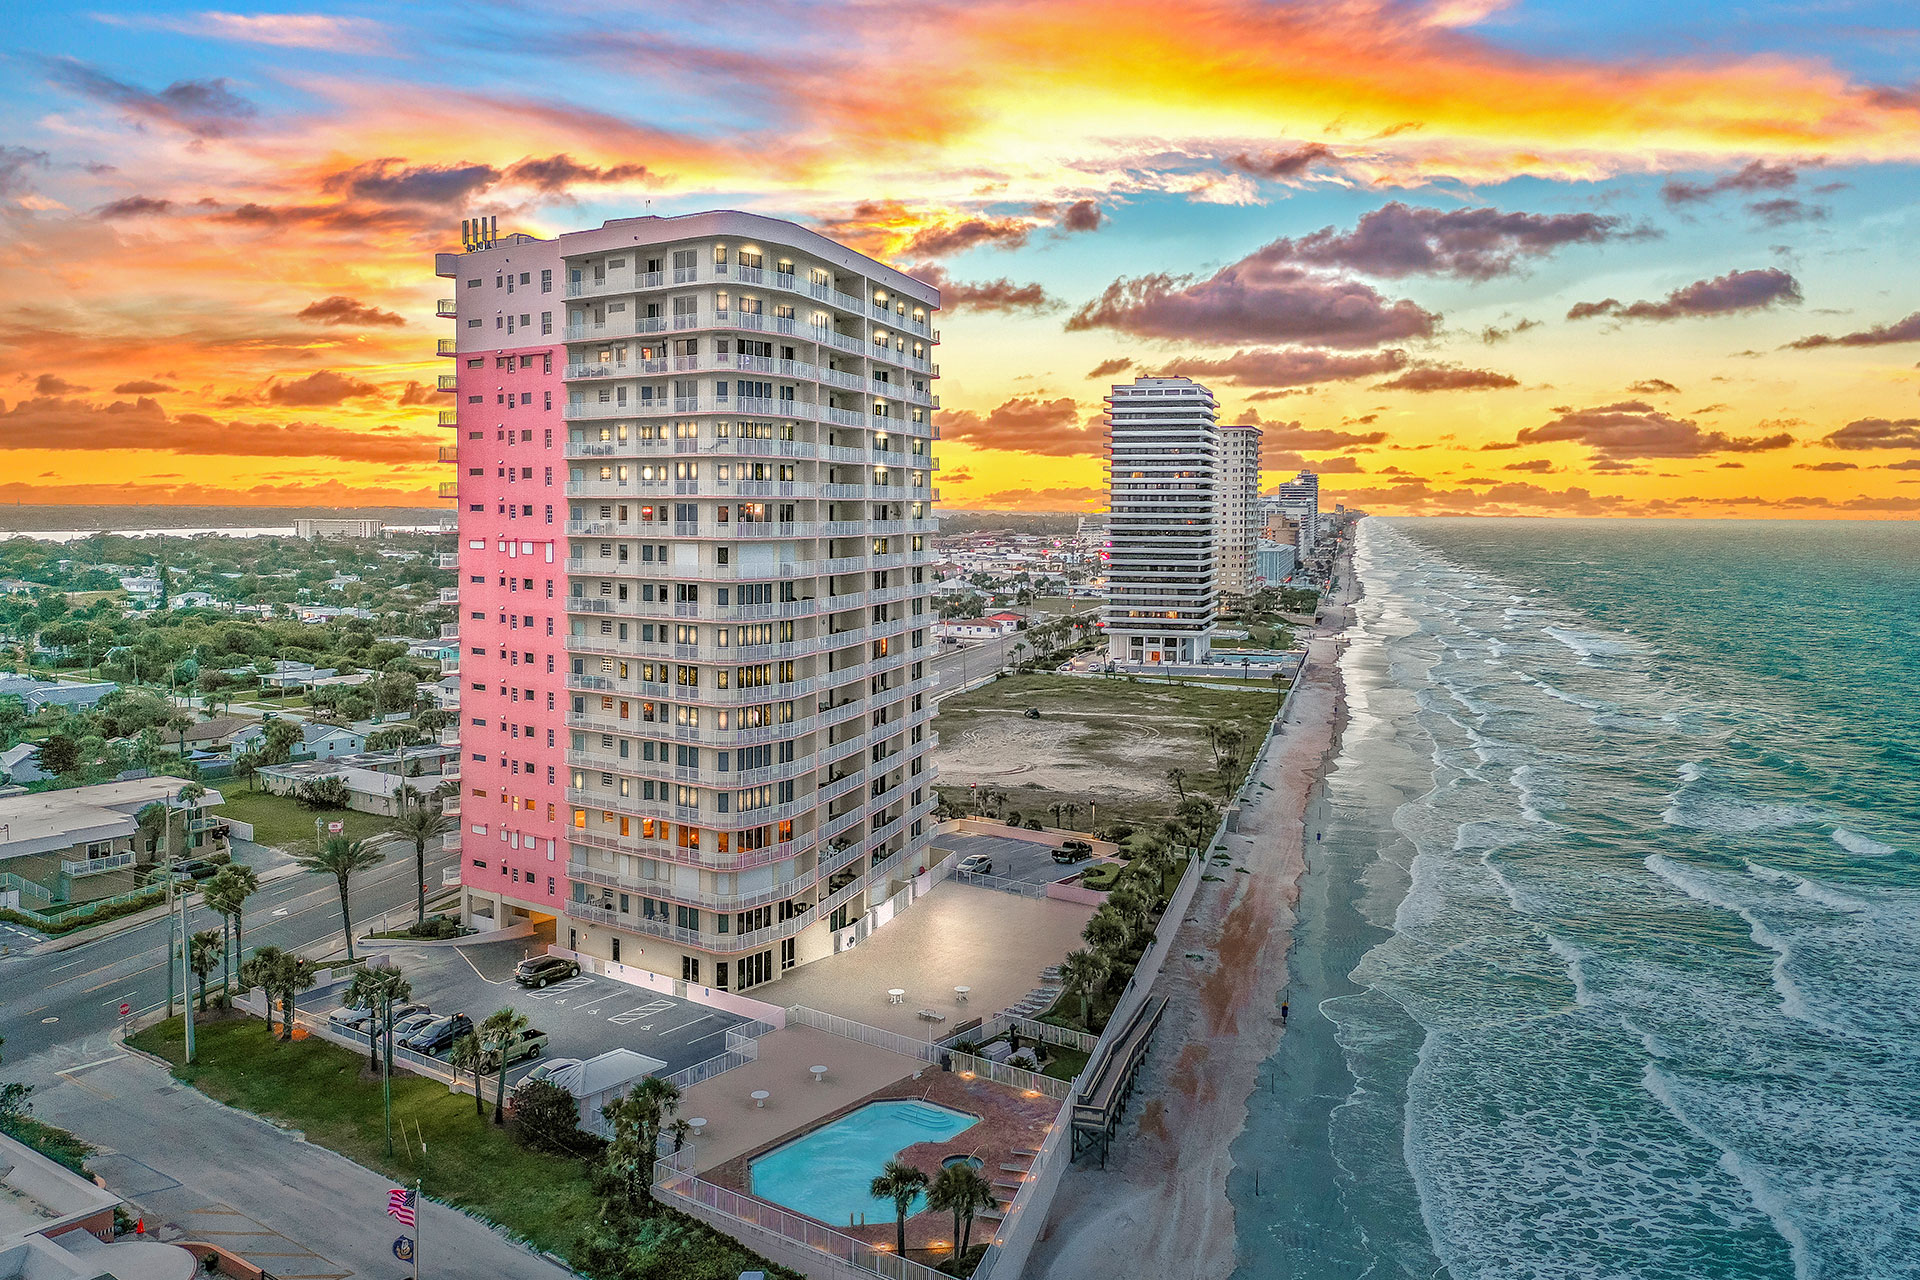 Island Crowne Condos For Sale in Daytona Beach. Florida Luxury Oceanfront Condos. 1900 N Atlantic Ave. The LUXE Group 386-299-4043